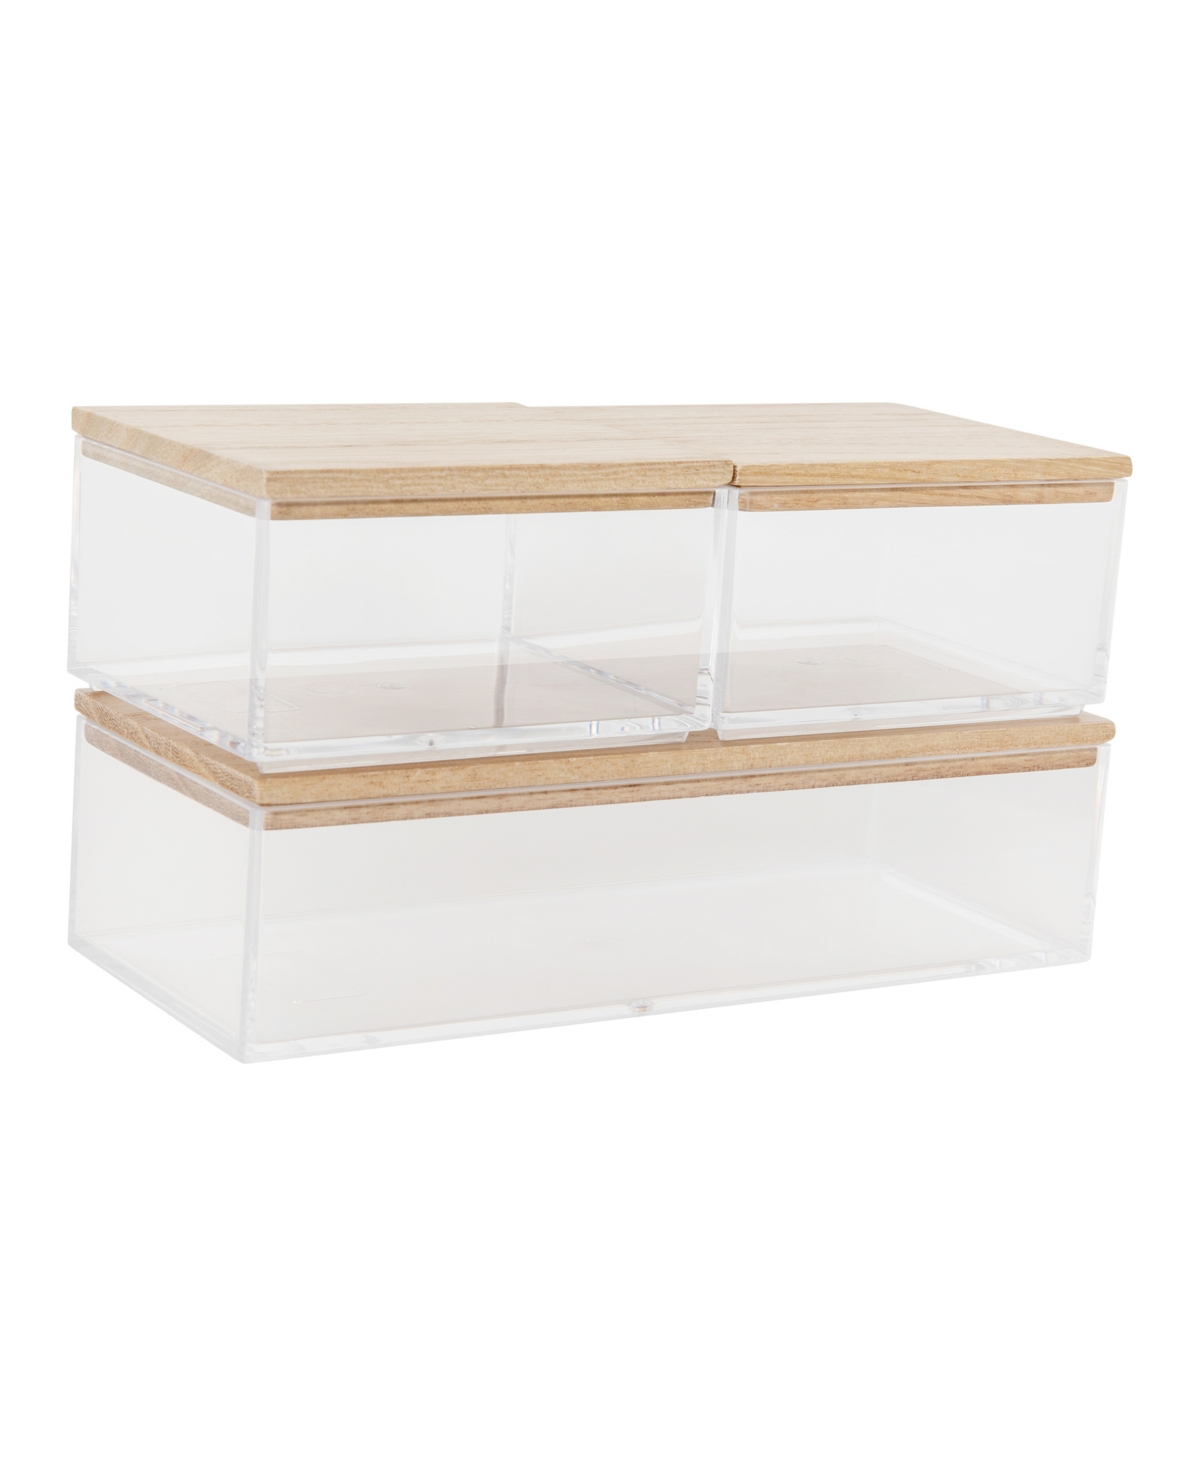 Brody Plastic Storage Organizer Bins with Paulownia Wood Lids for Home Office, Kitchen, or Bathroom, 2 Small, 1 Medium - Clear, Light N